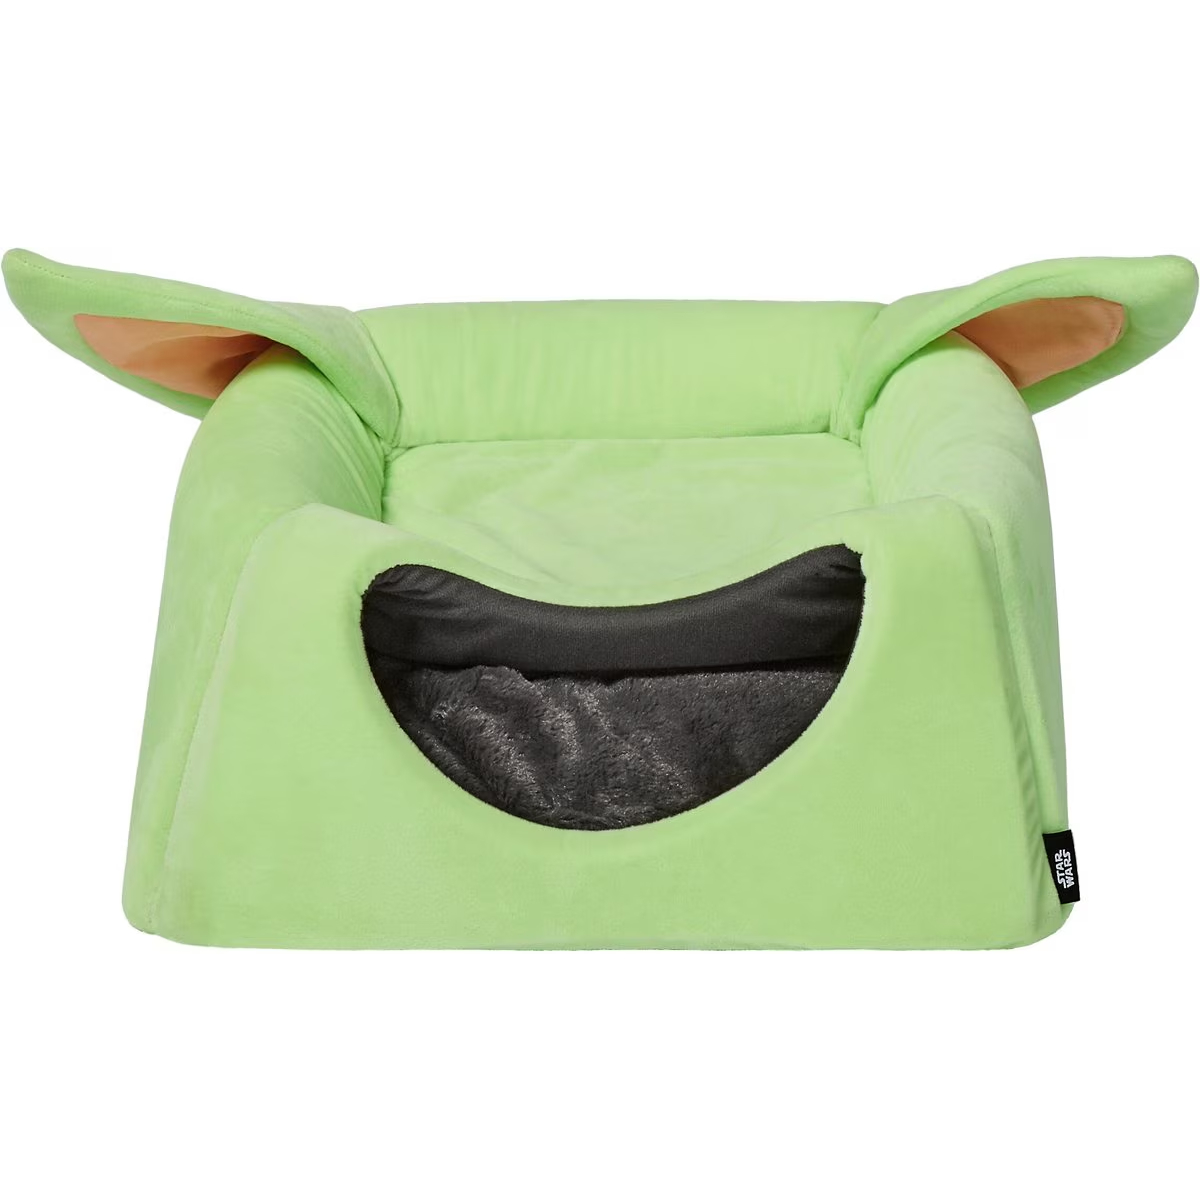 STAR WARS THE MANDALORIAN_S THE CHILD Covered Cat Bed New